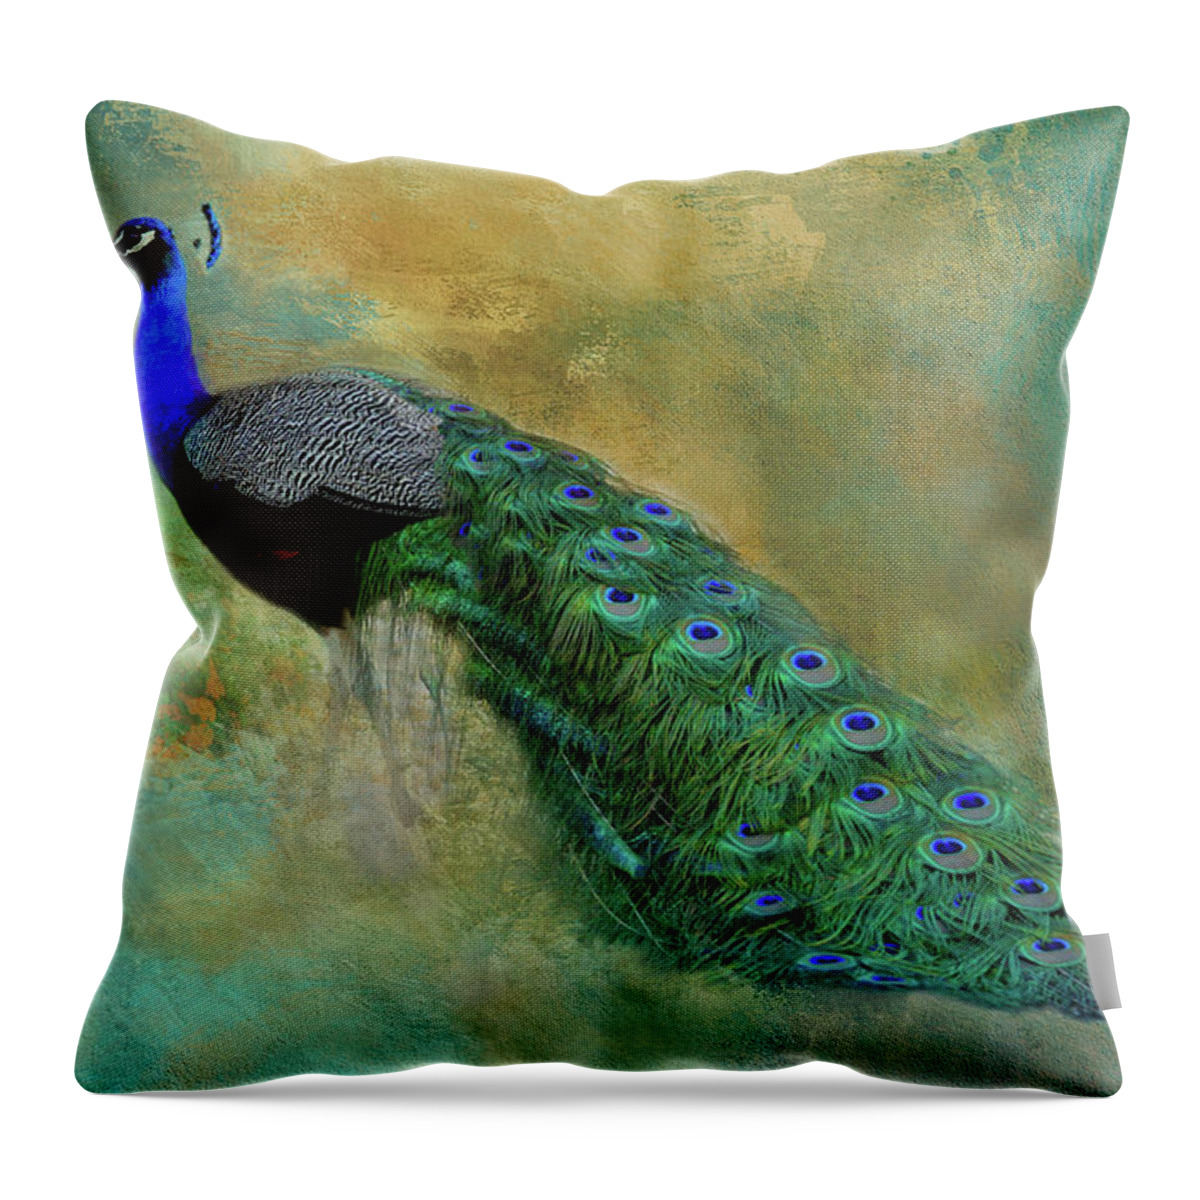 Peacock Throw Pillow featuring the photograph Lord Peacock by HH Photography of Florida